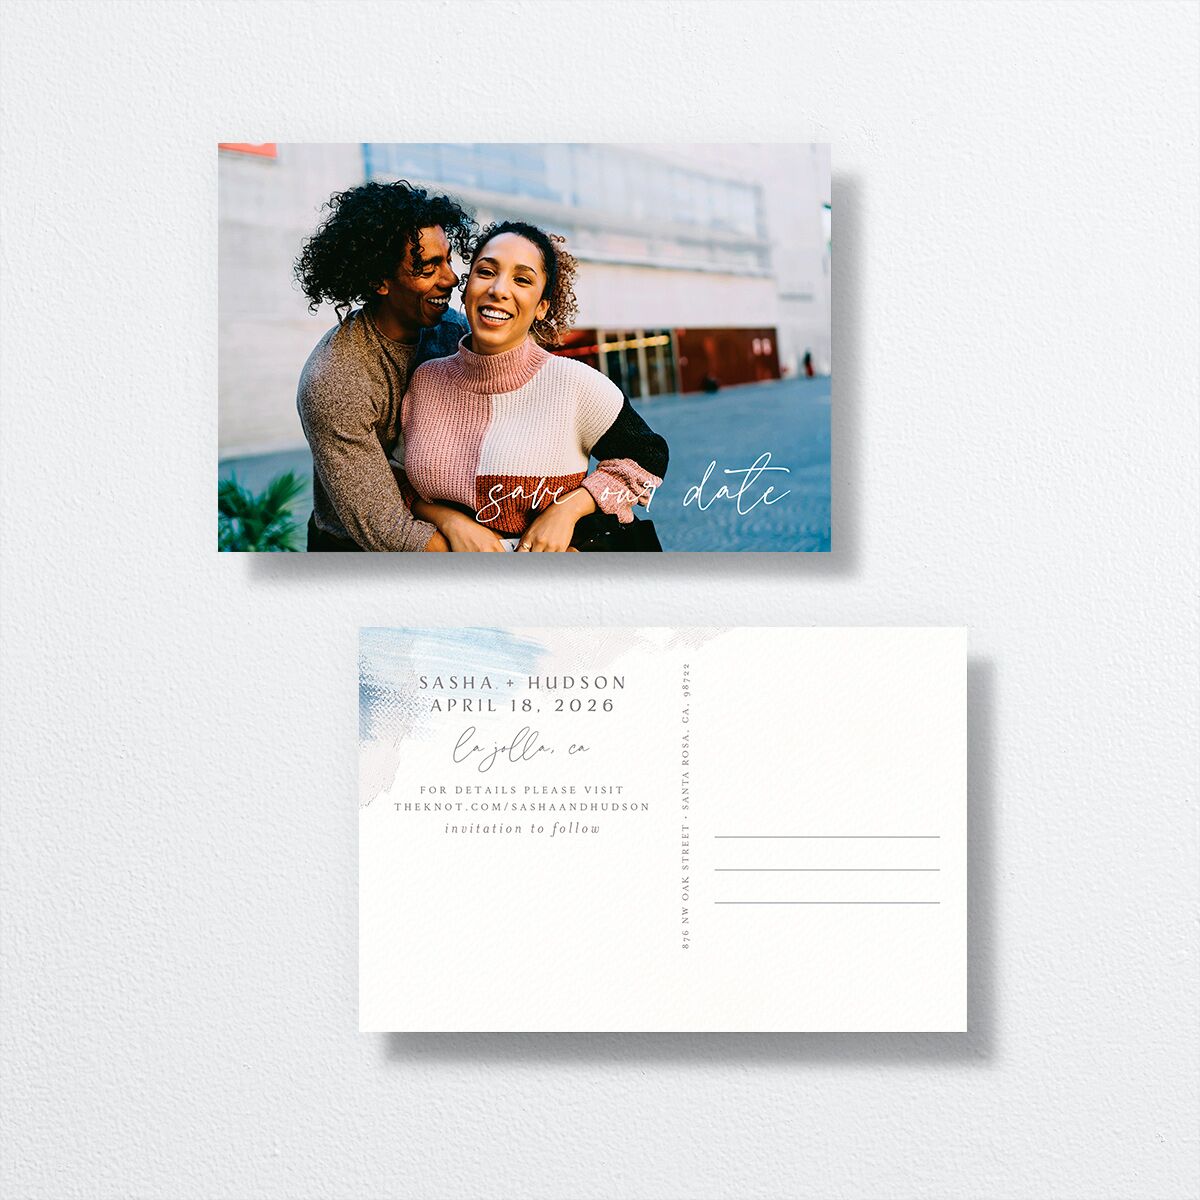 Minimal Brush Save The Date Postcards front-and-back in blue